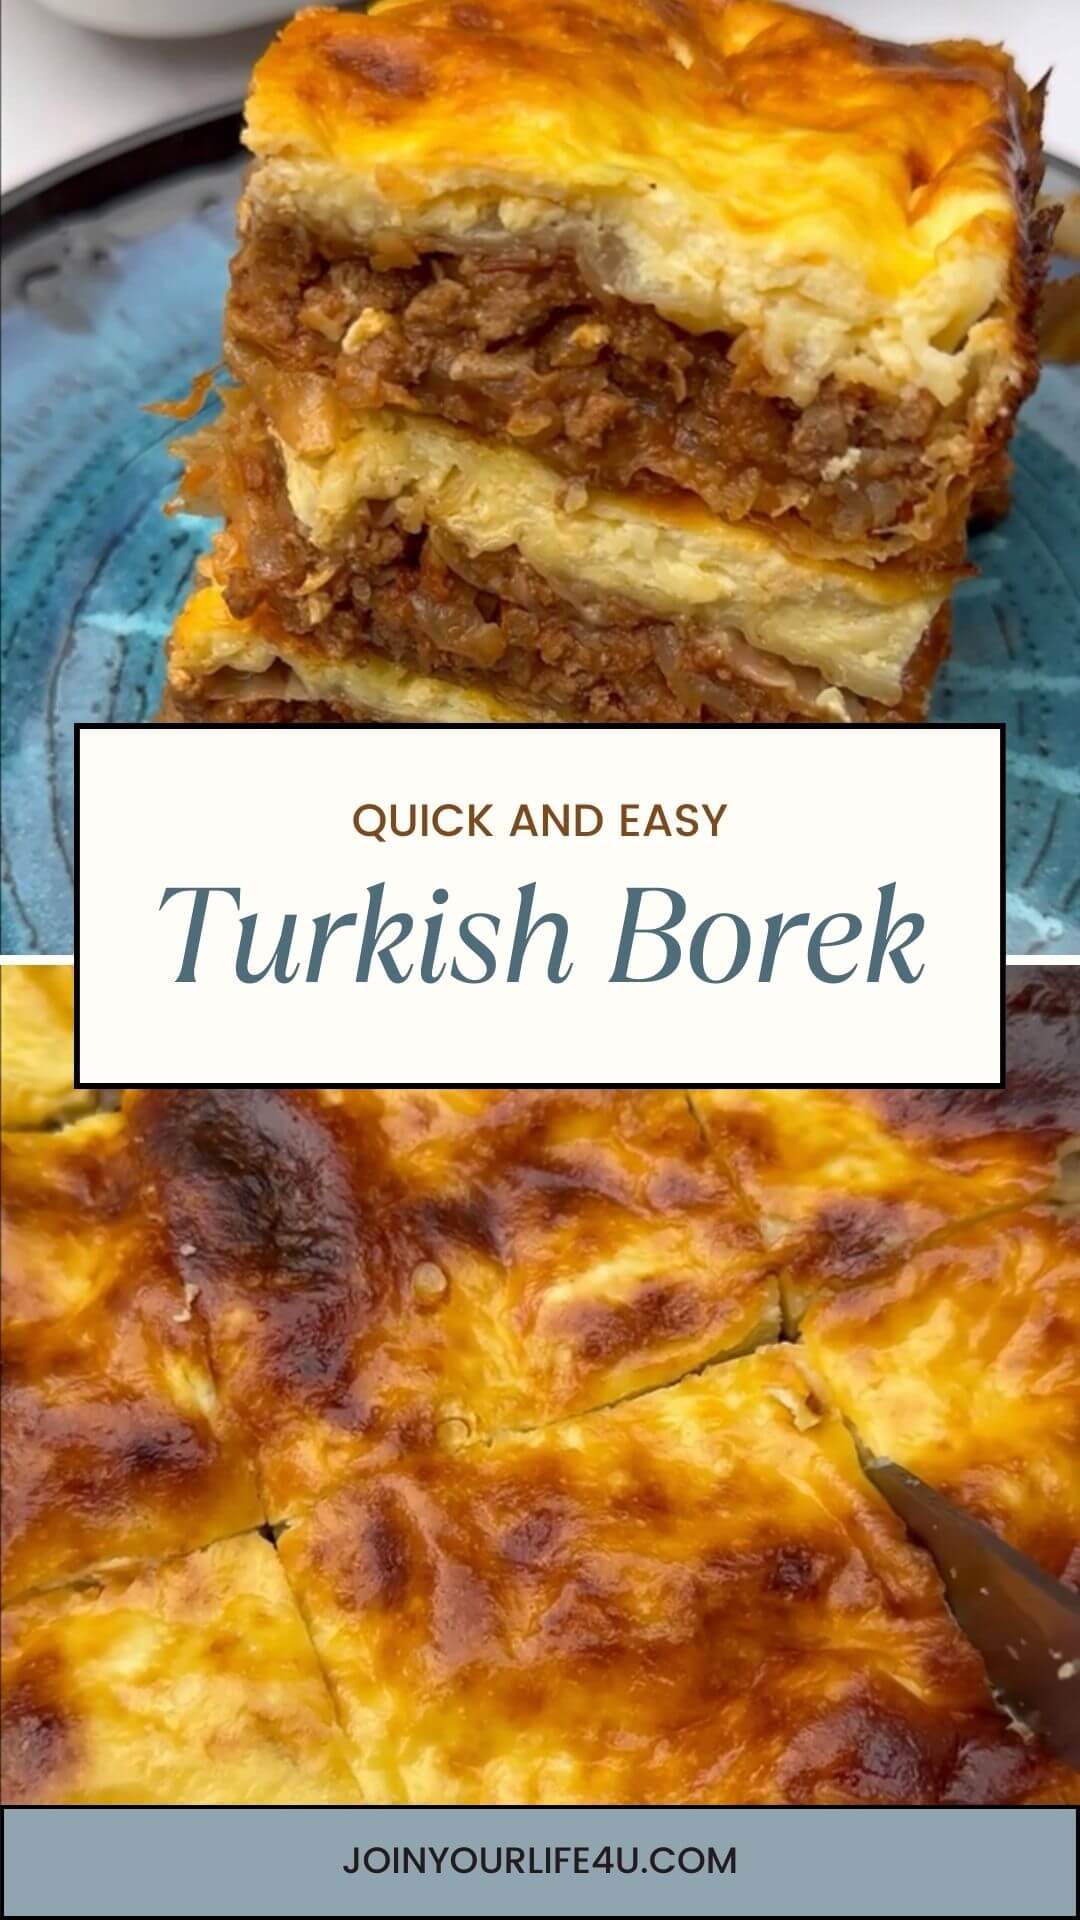 Collage featuring freshly baked Turkish Börek with a golden-brown crust, served in a pan, and a stack of three portions of Turkish Börek. 